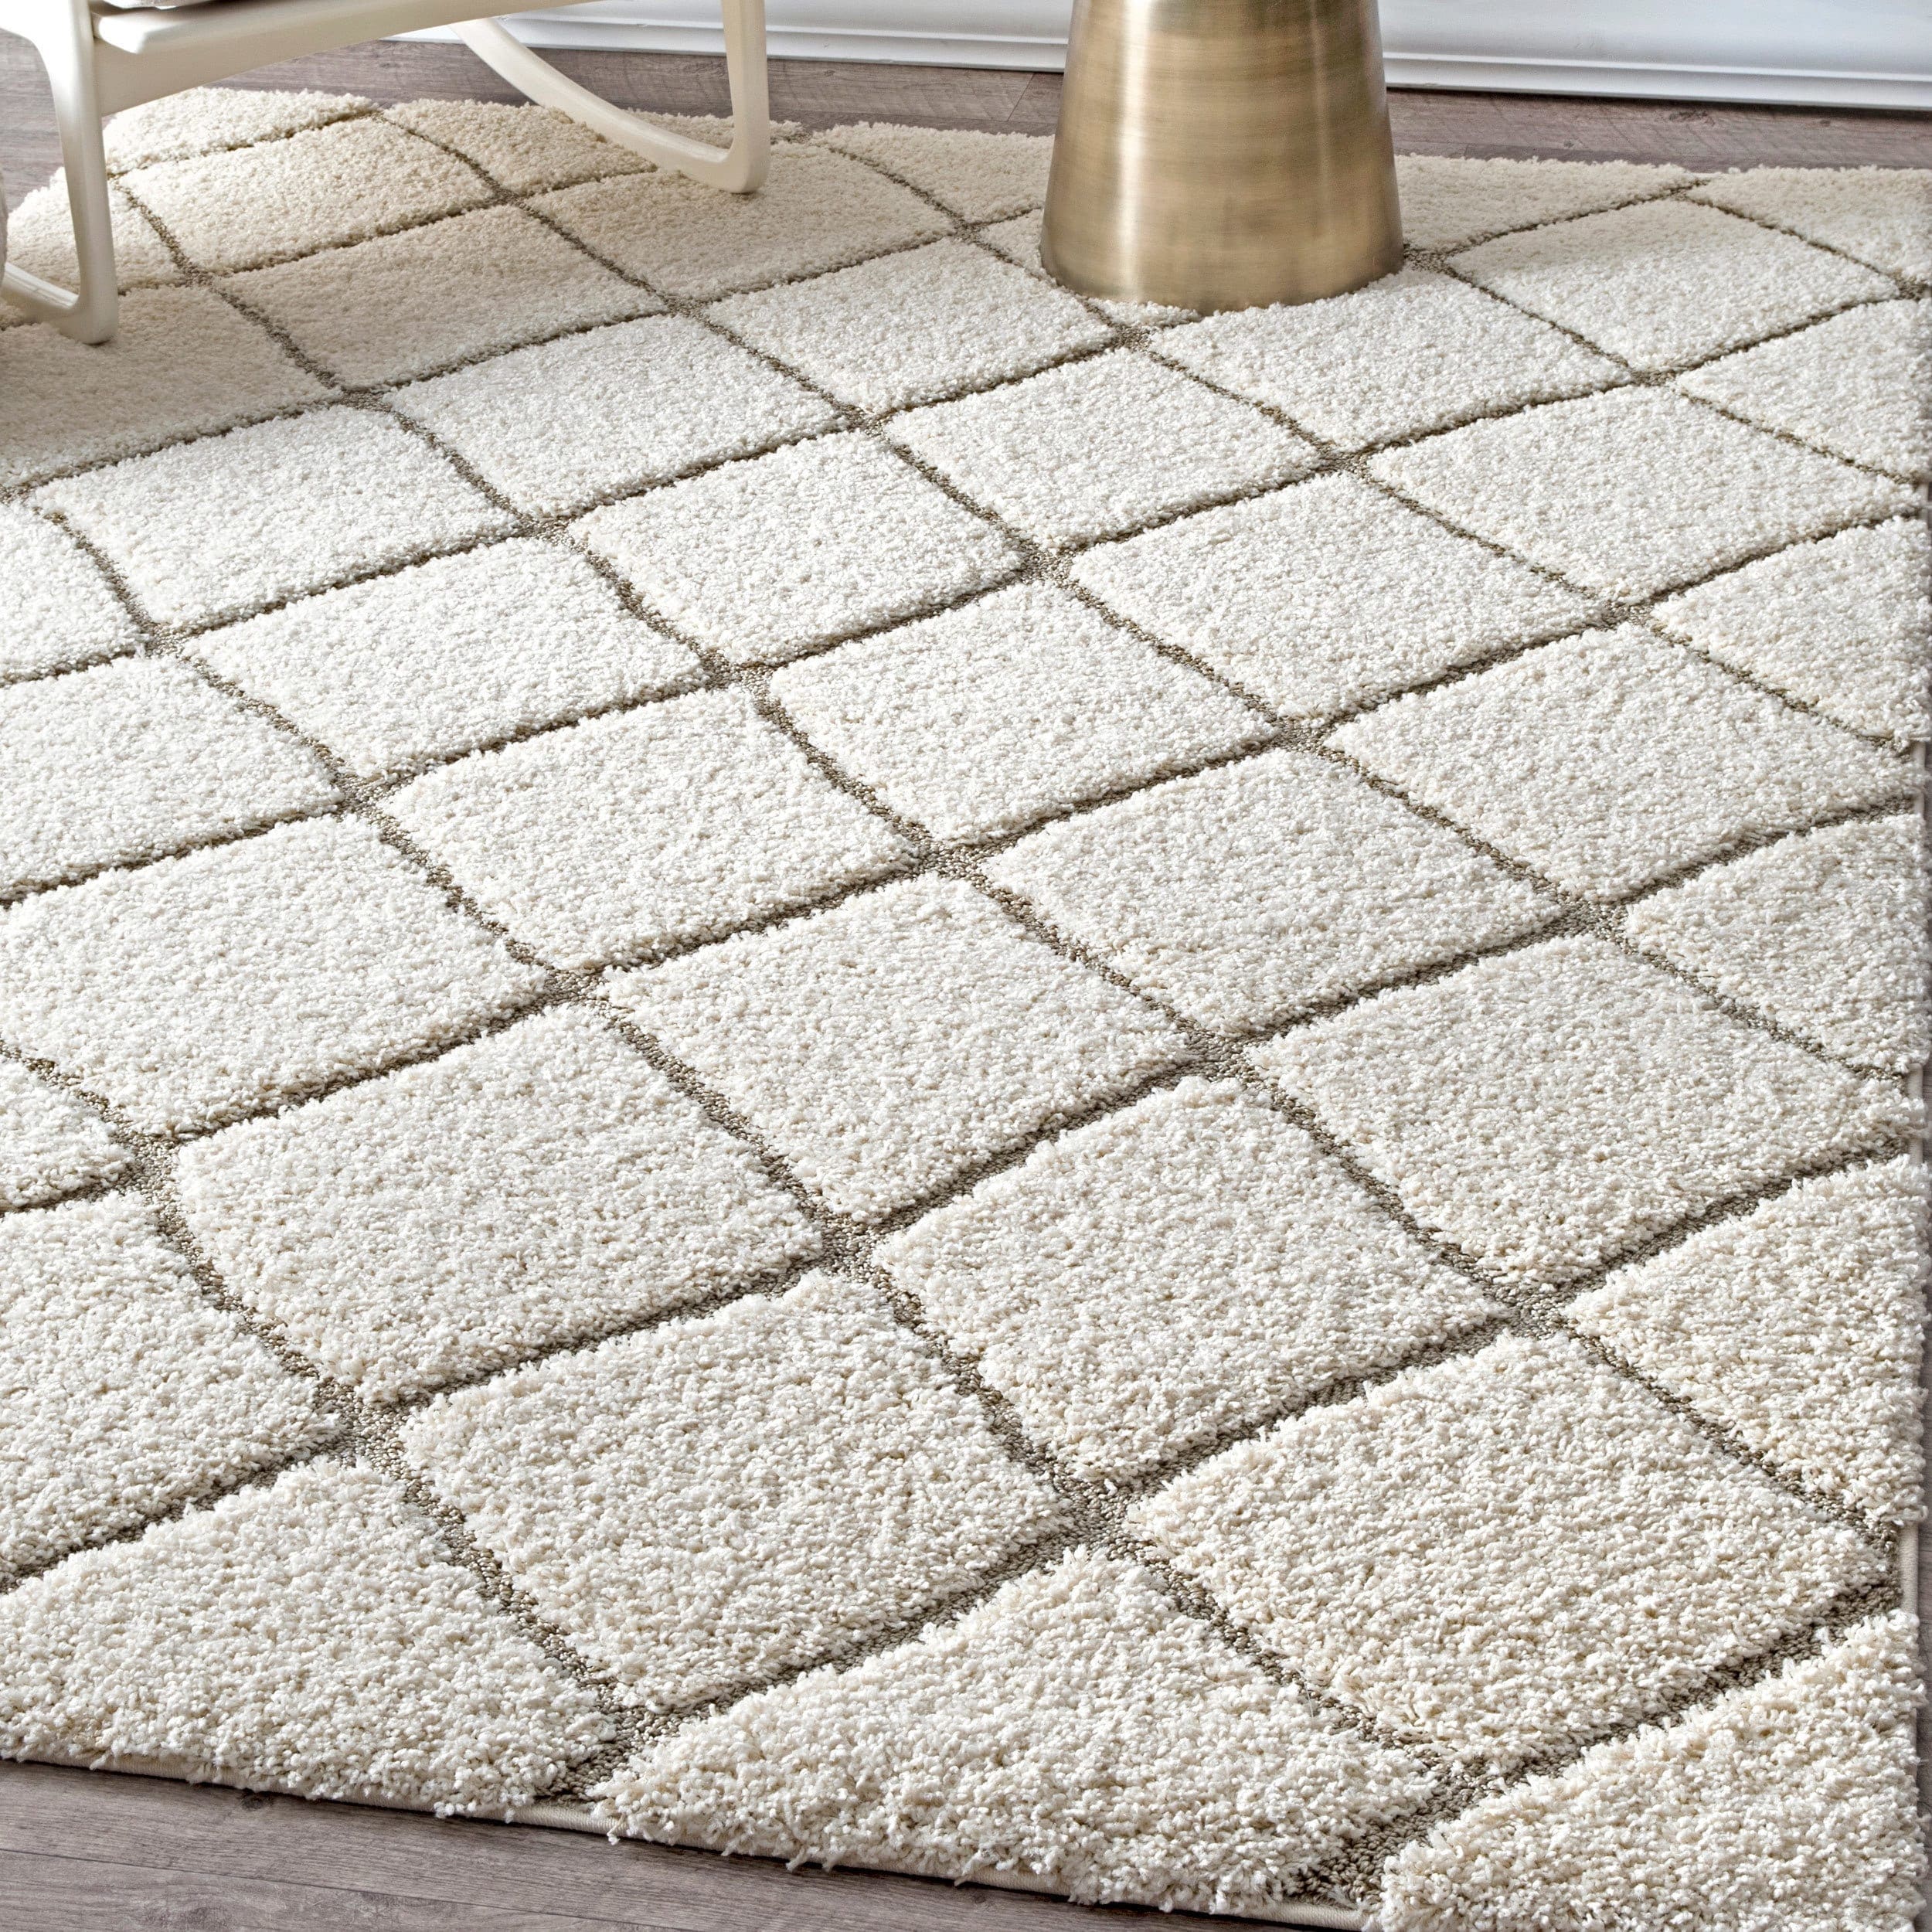 nuLOOM Soft and Plush Moroccan Trellis Shag Rug - Overstock - 16149193